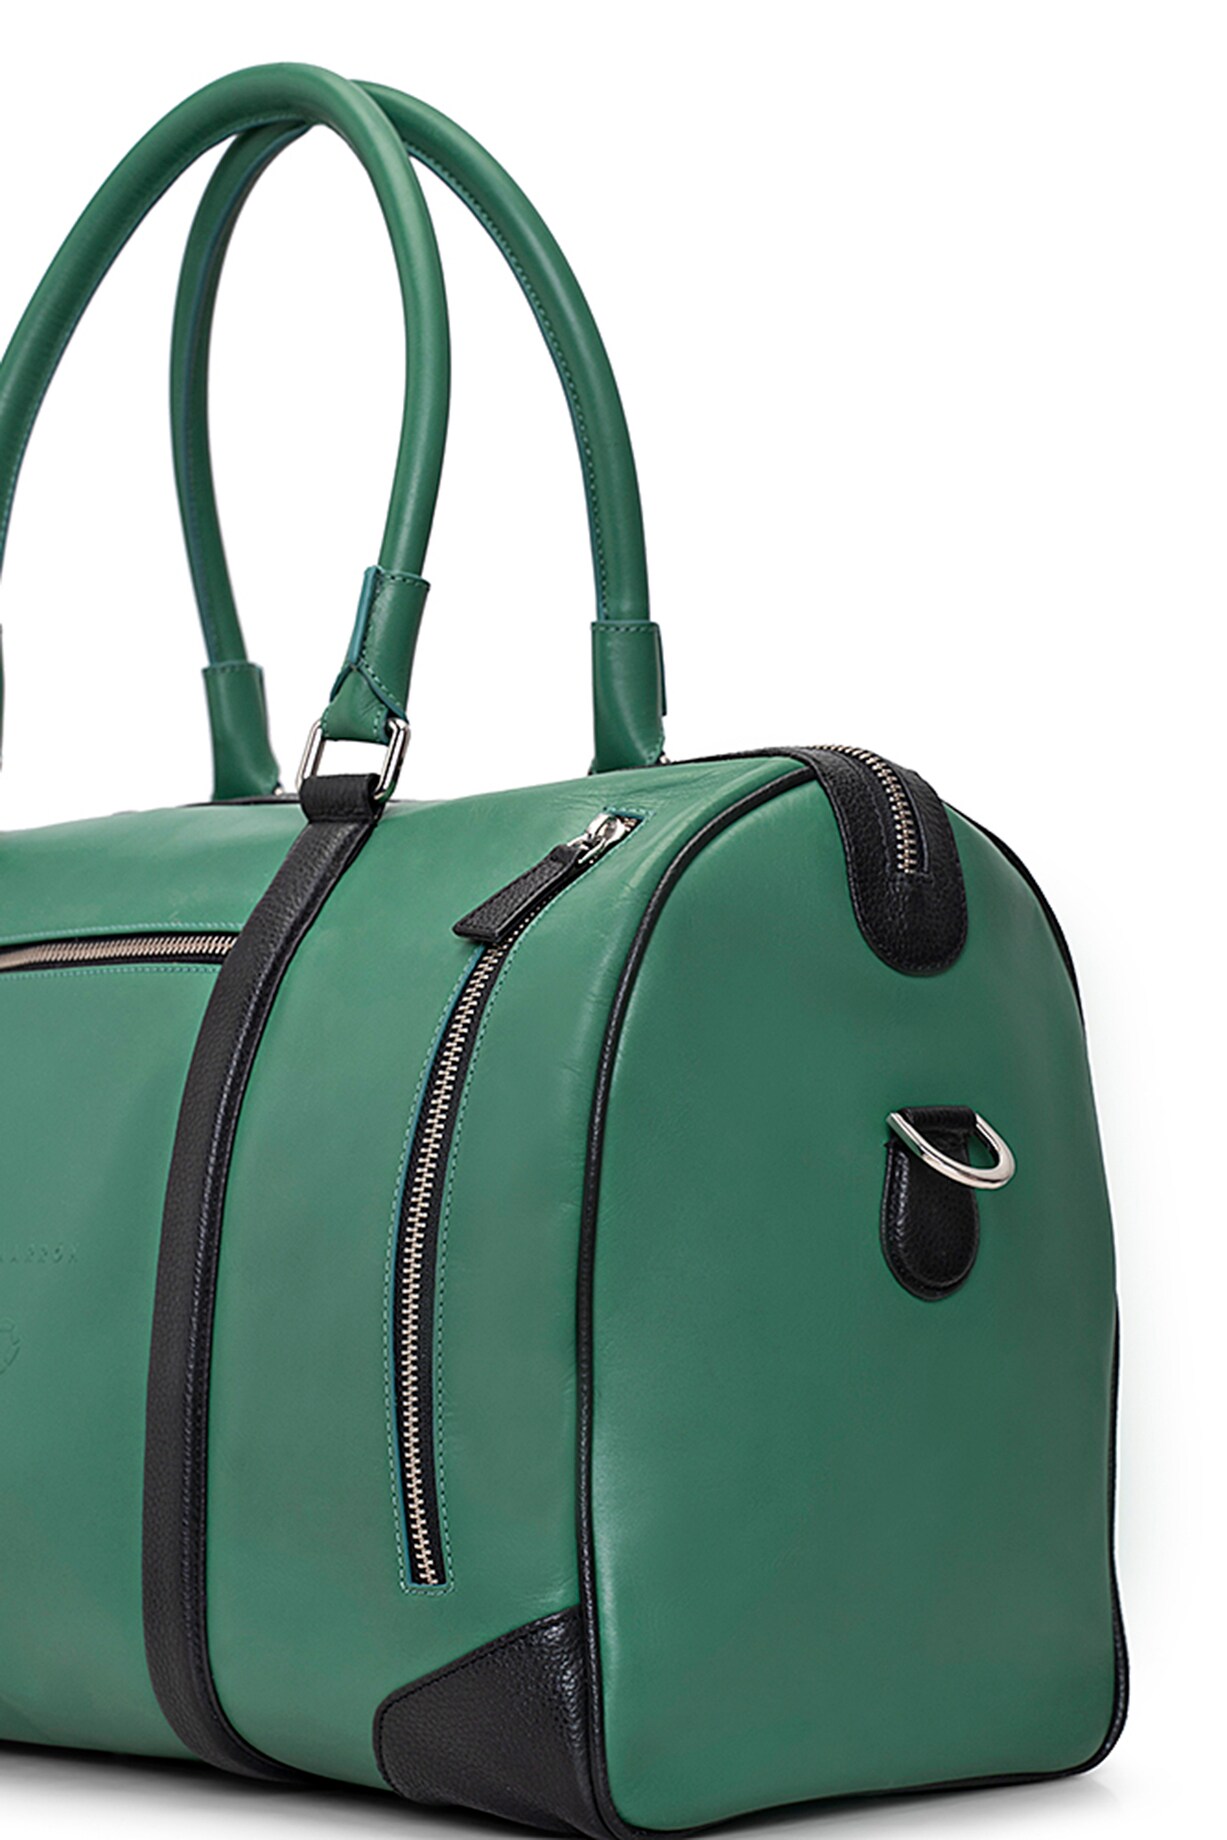 Green & Black Handcrafted Duffle Bag by Tiger Marron